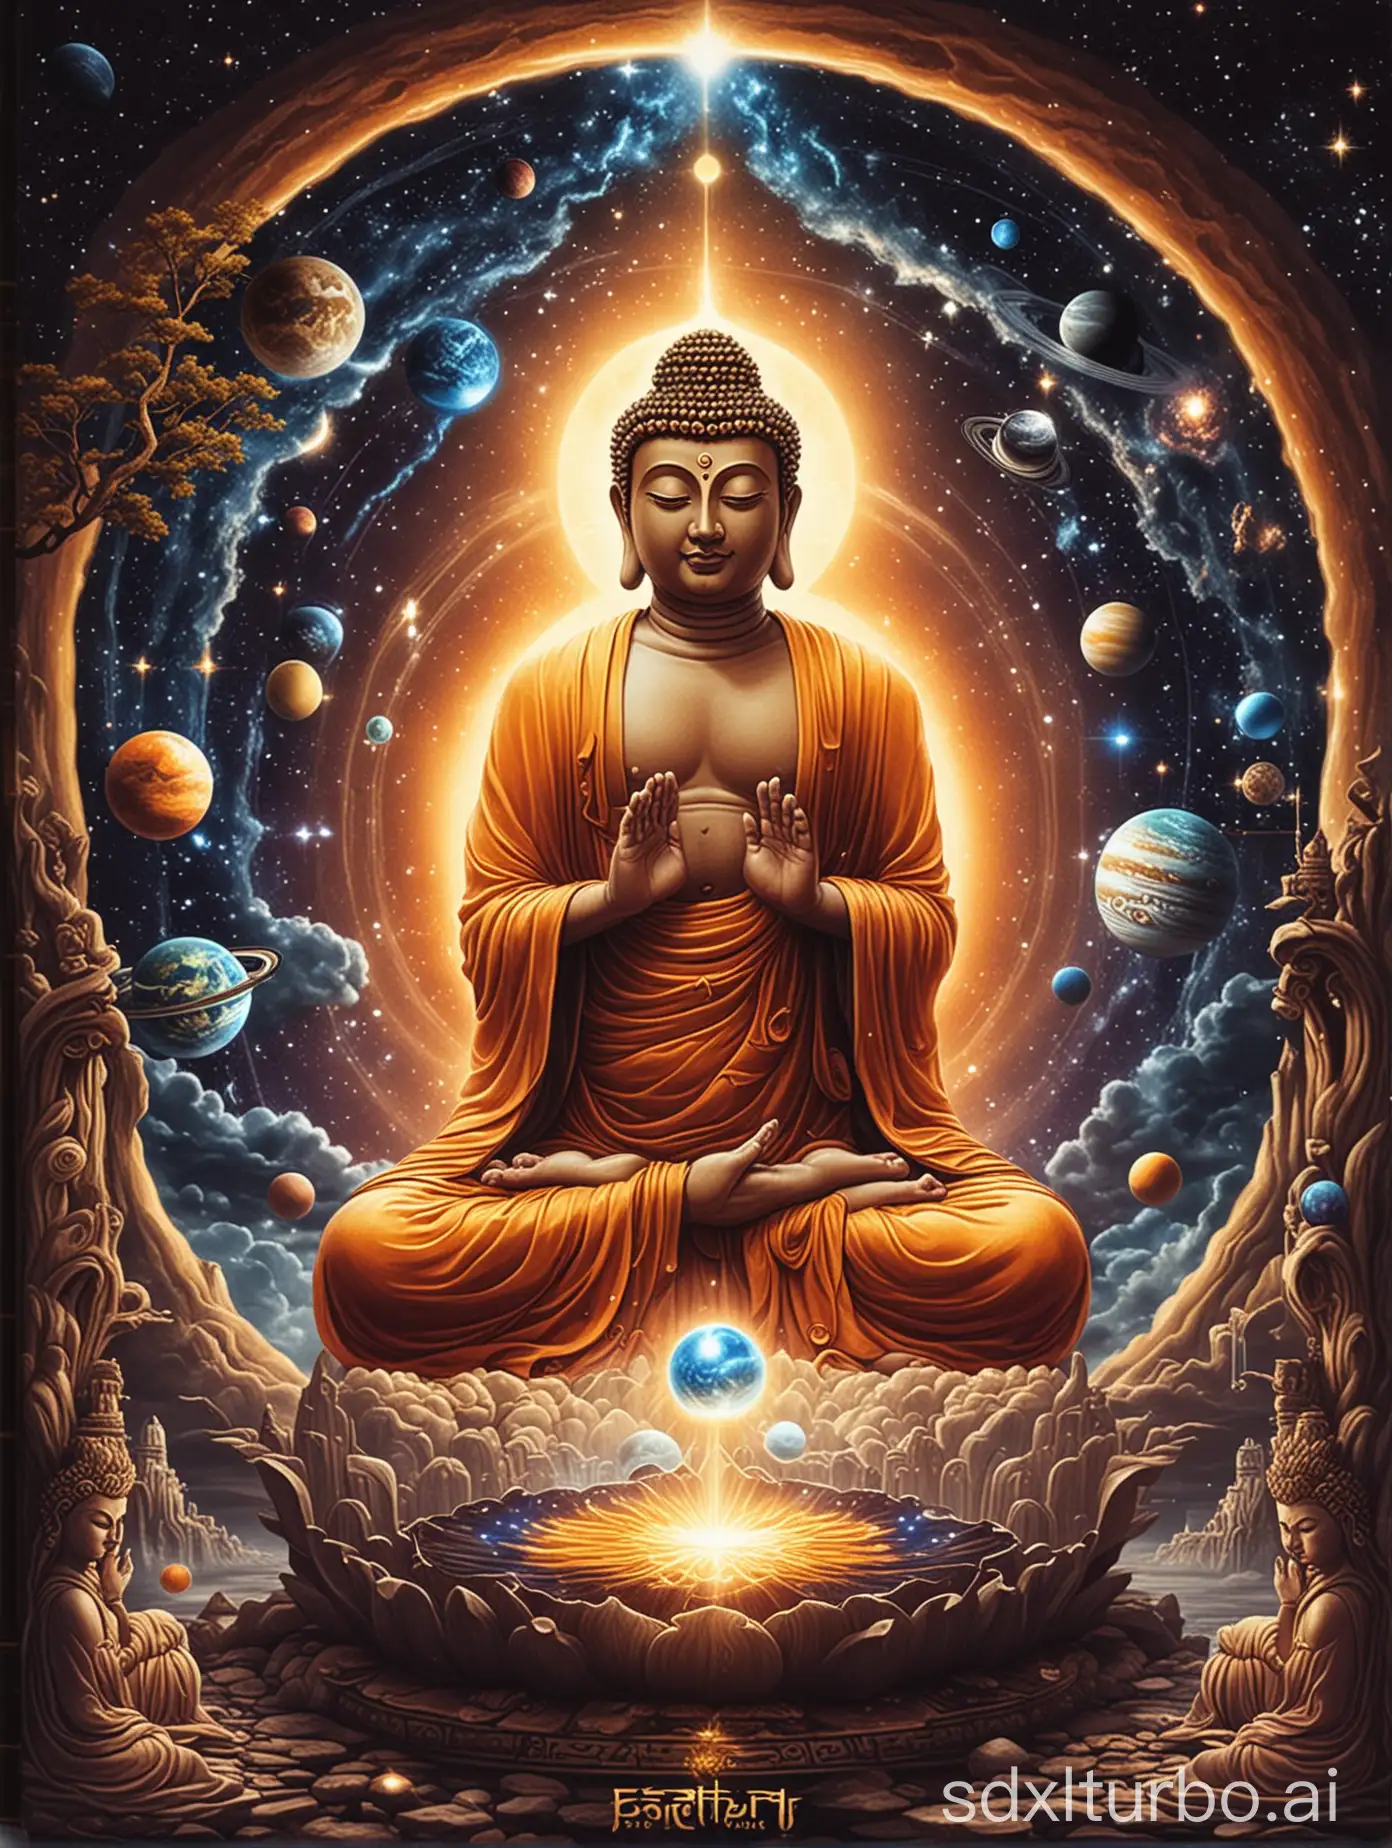 can you createa cover page for my project related this - Rebirth, computer, purification, solar system, Buddha god